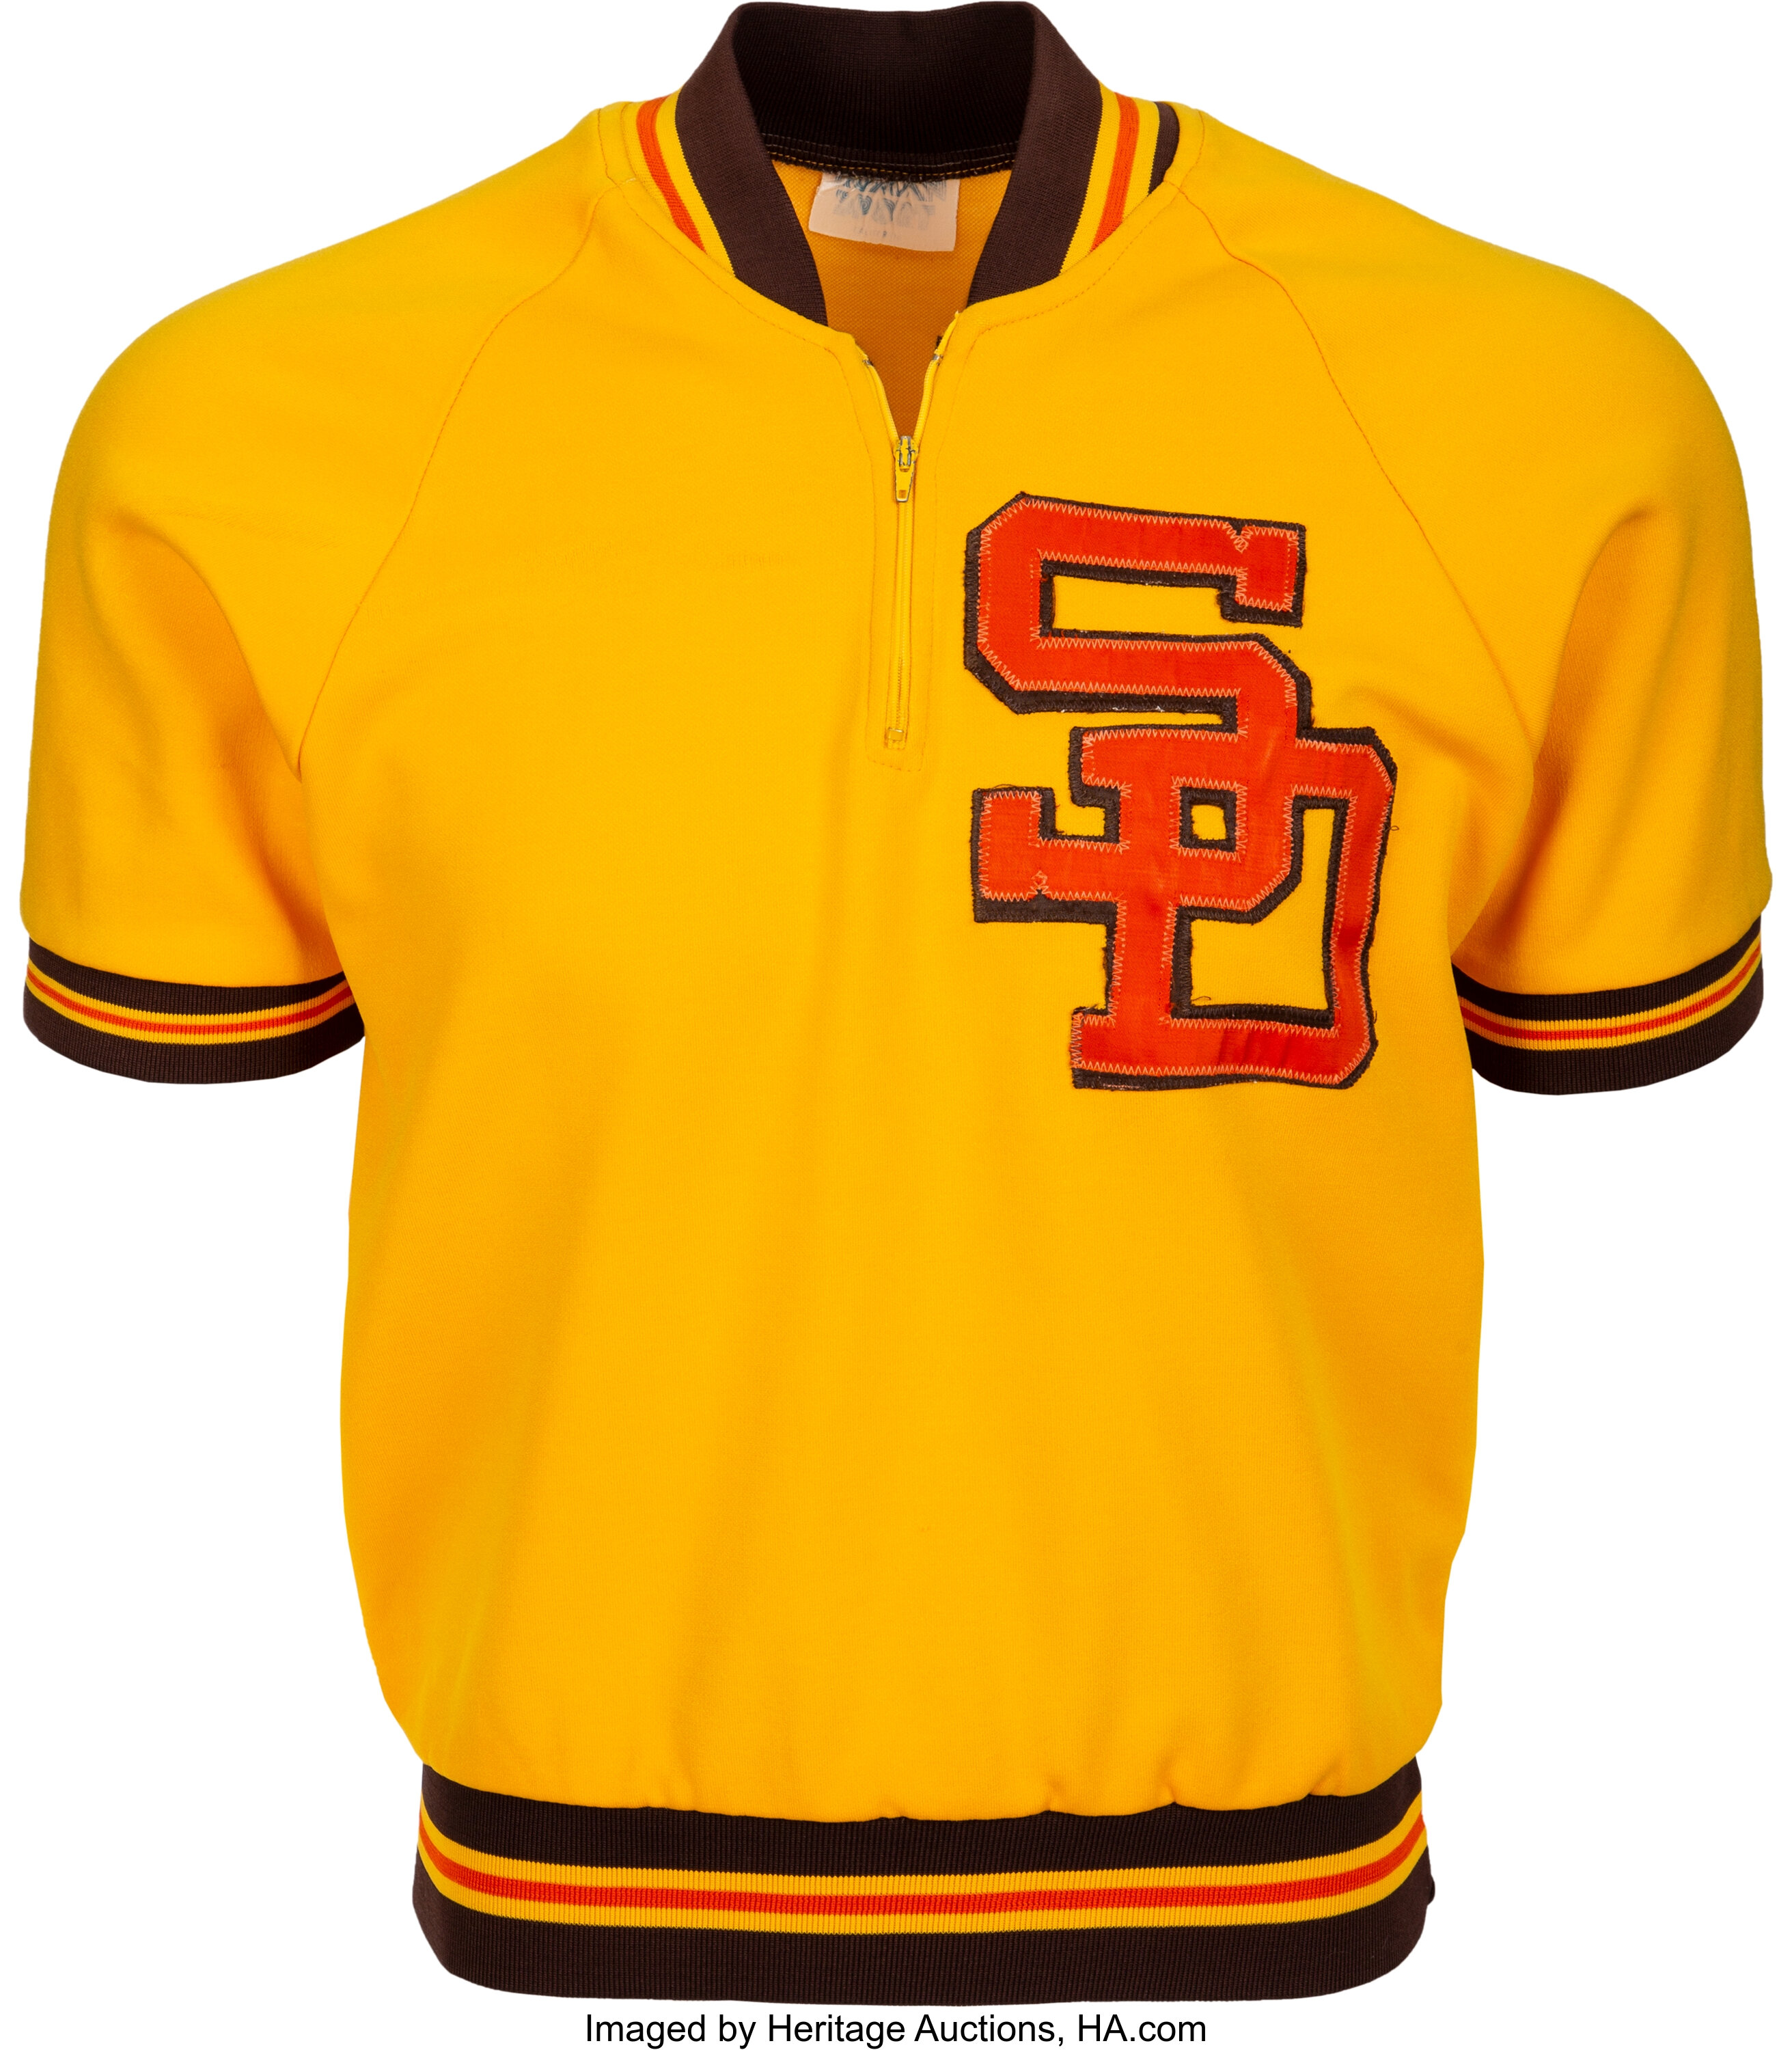 More modern mock-ups of Padres uniforms in retro colors